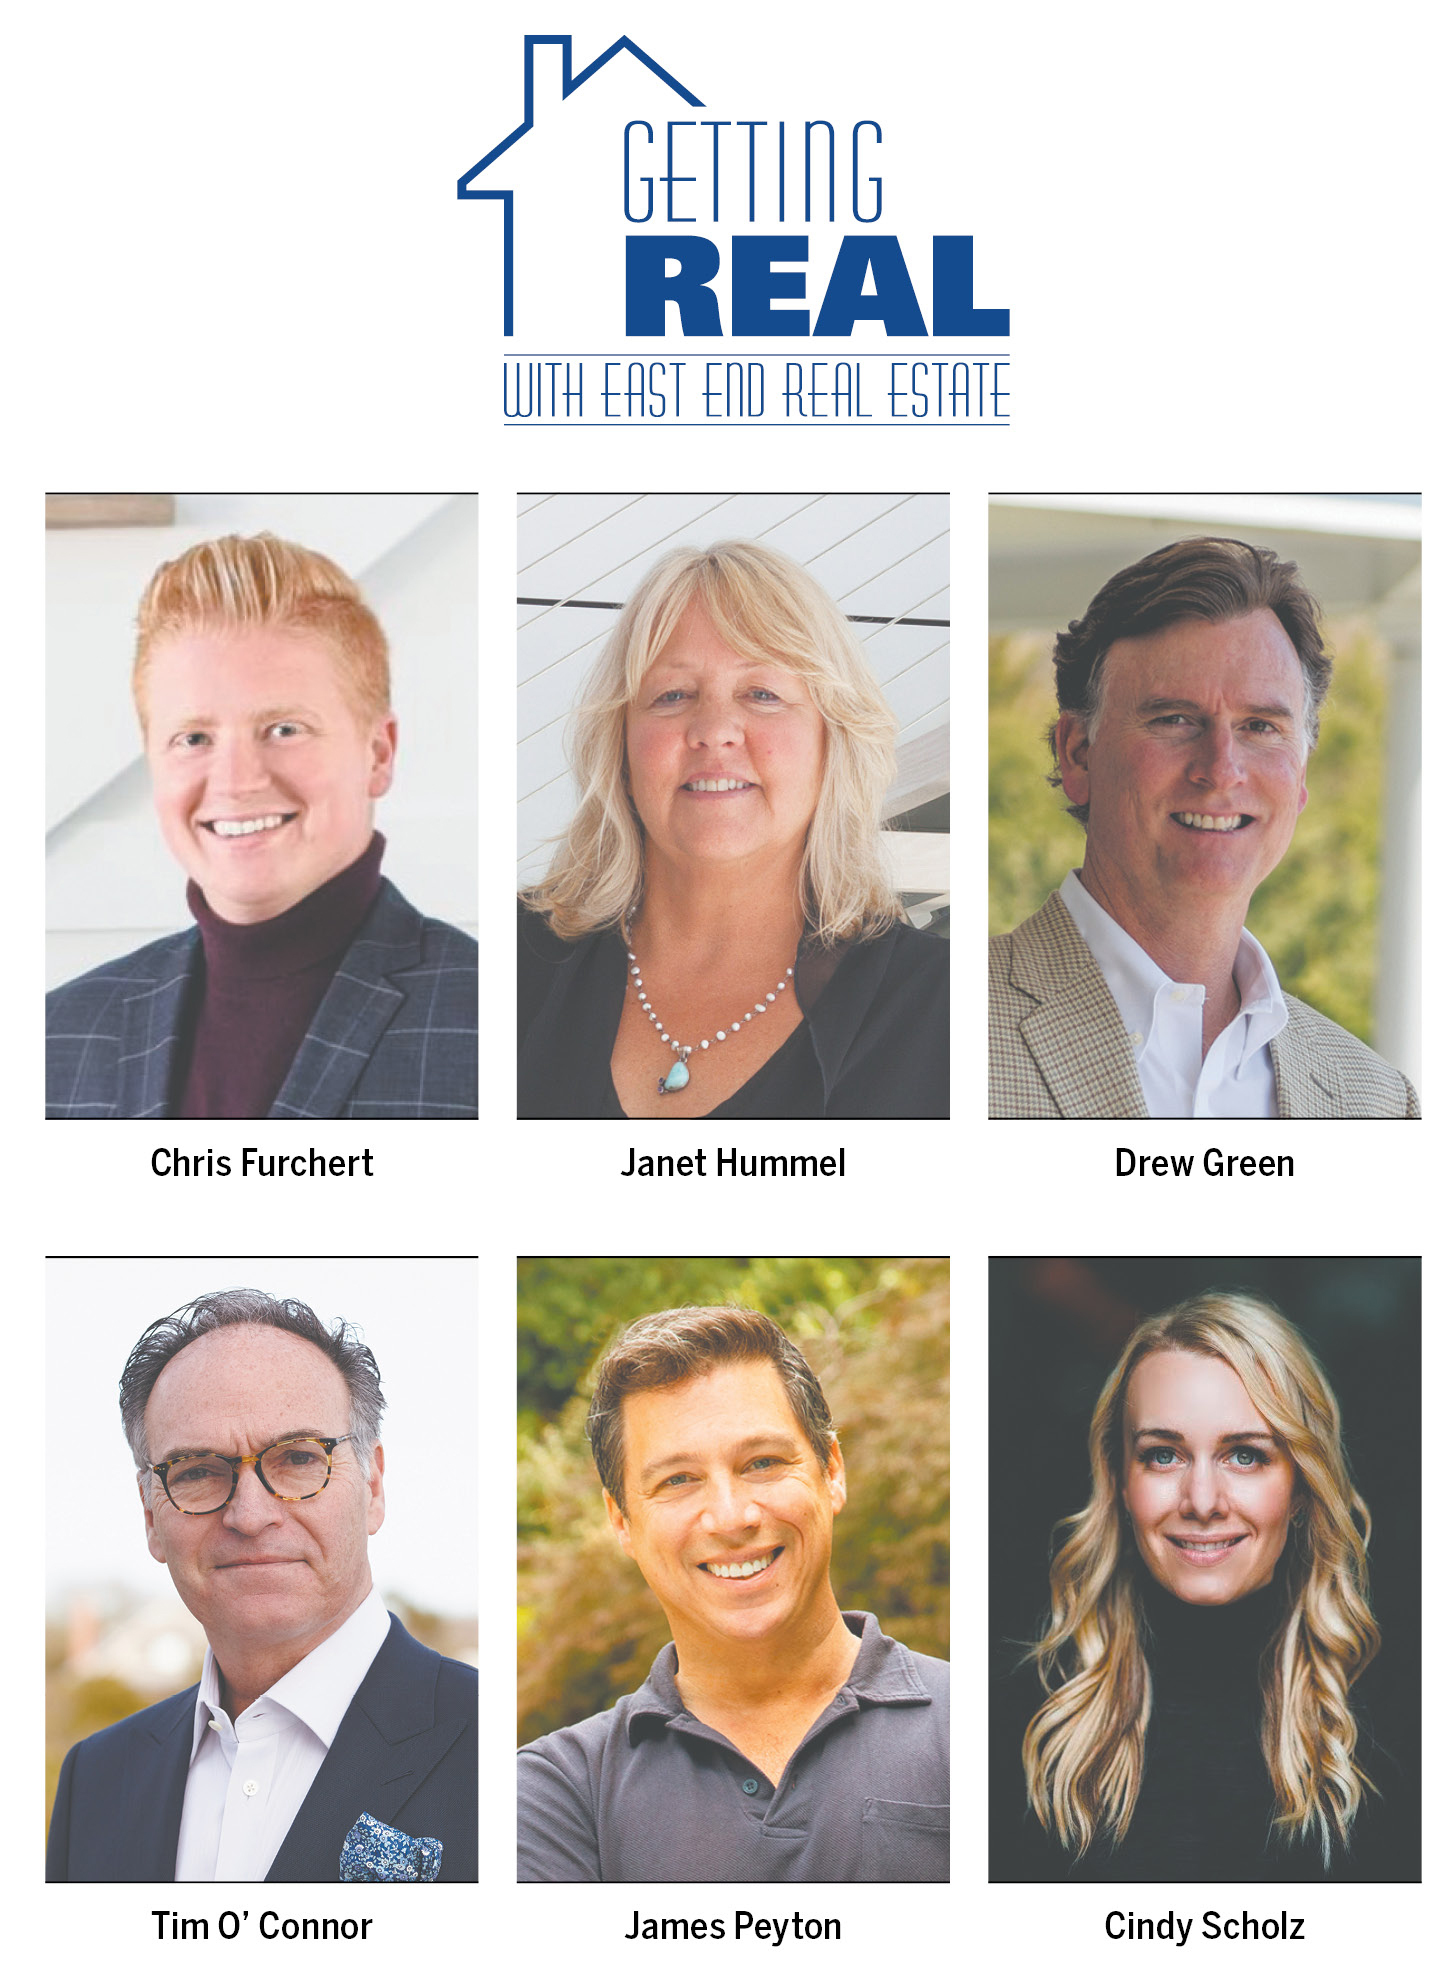 The panelists for the Getting Real with East End Real Estate: Putting a House to Work discussion.